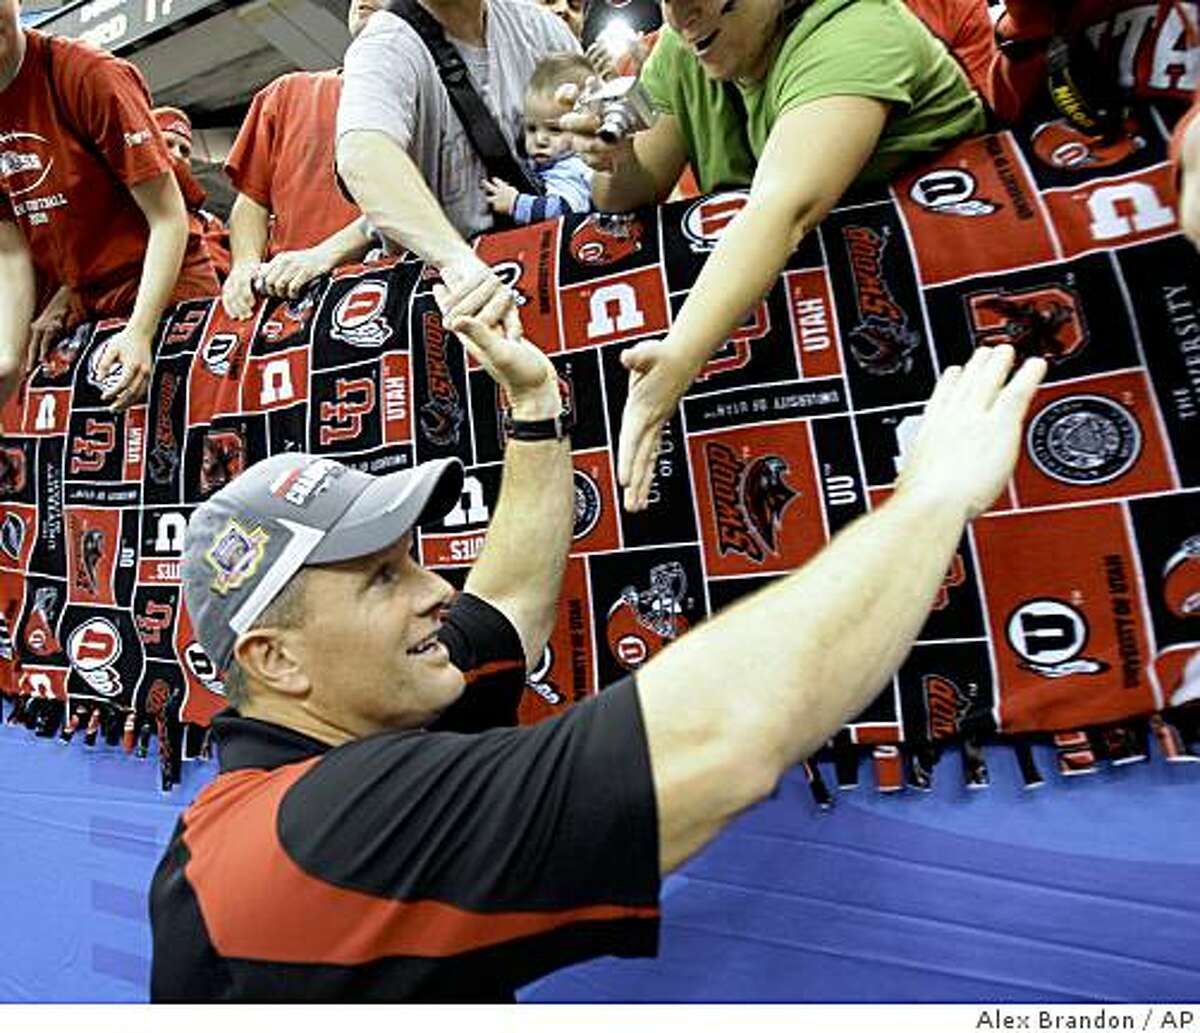 Utah coach kyle Wittingham celebrates with fans after defeating Alabama in the Sugar Bowl in New Orleans, Friday, Jan. 2, 2009. Utah defeated Alabama 31-17.